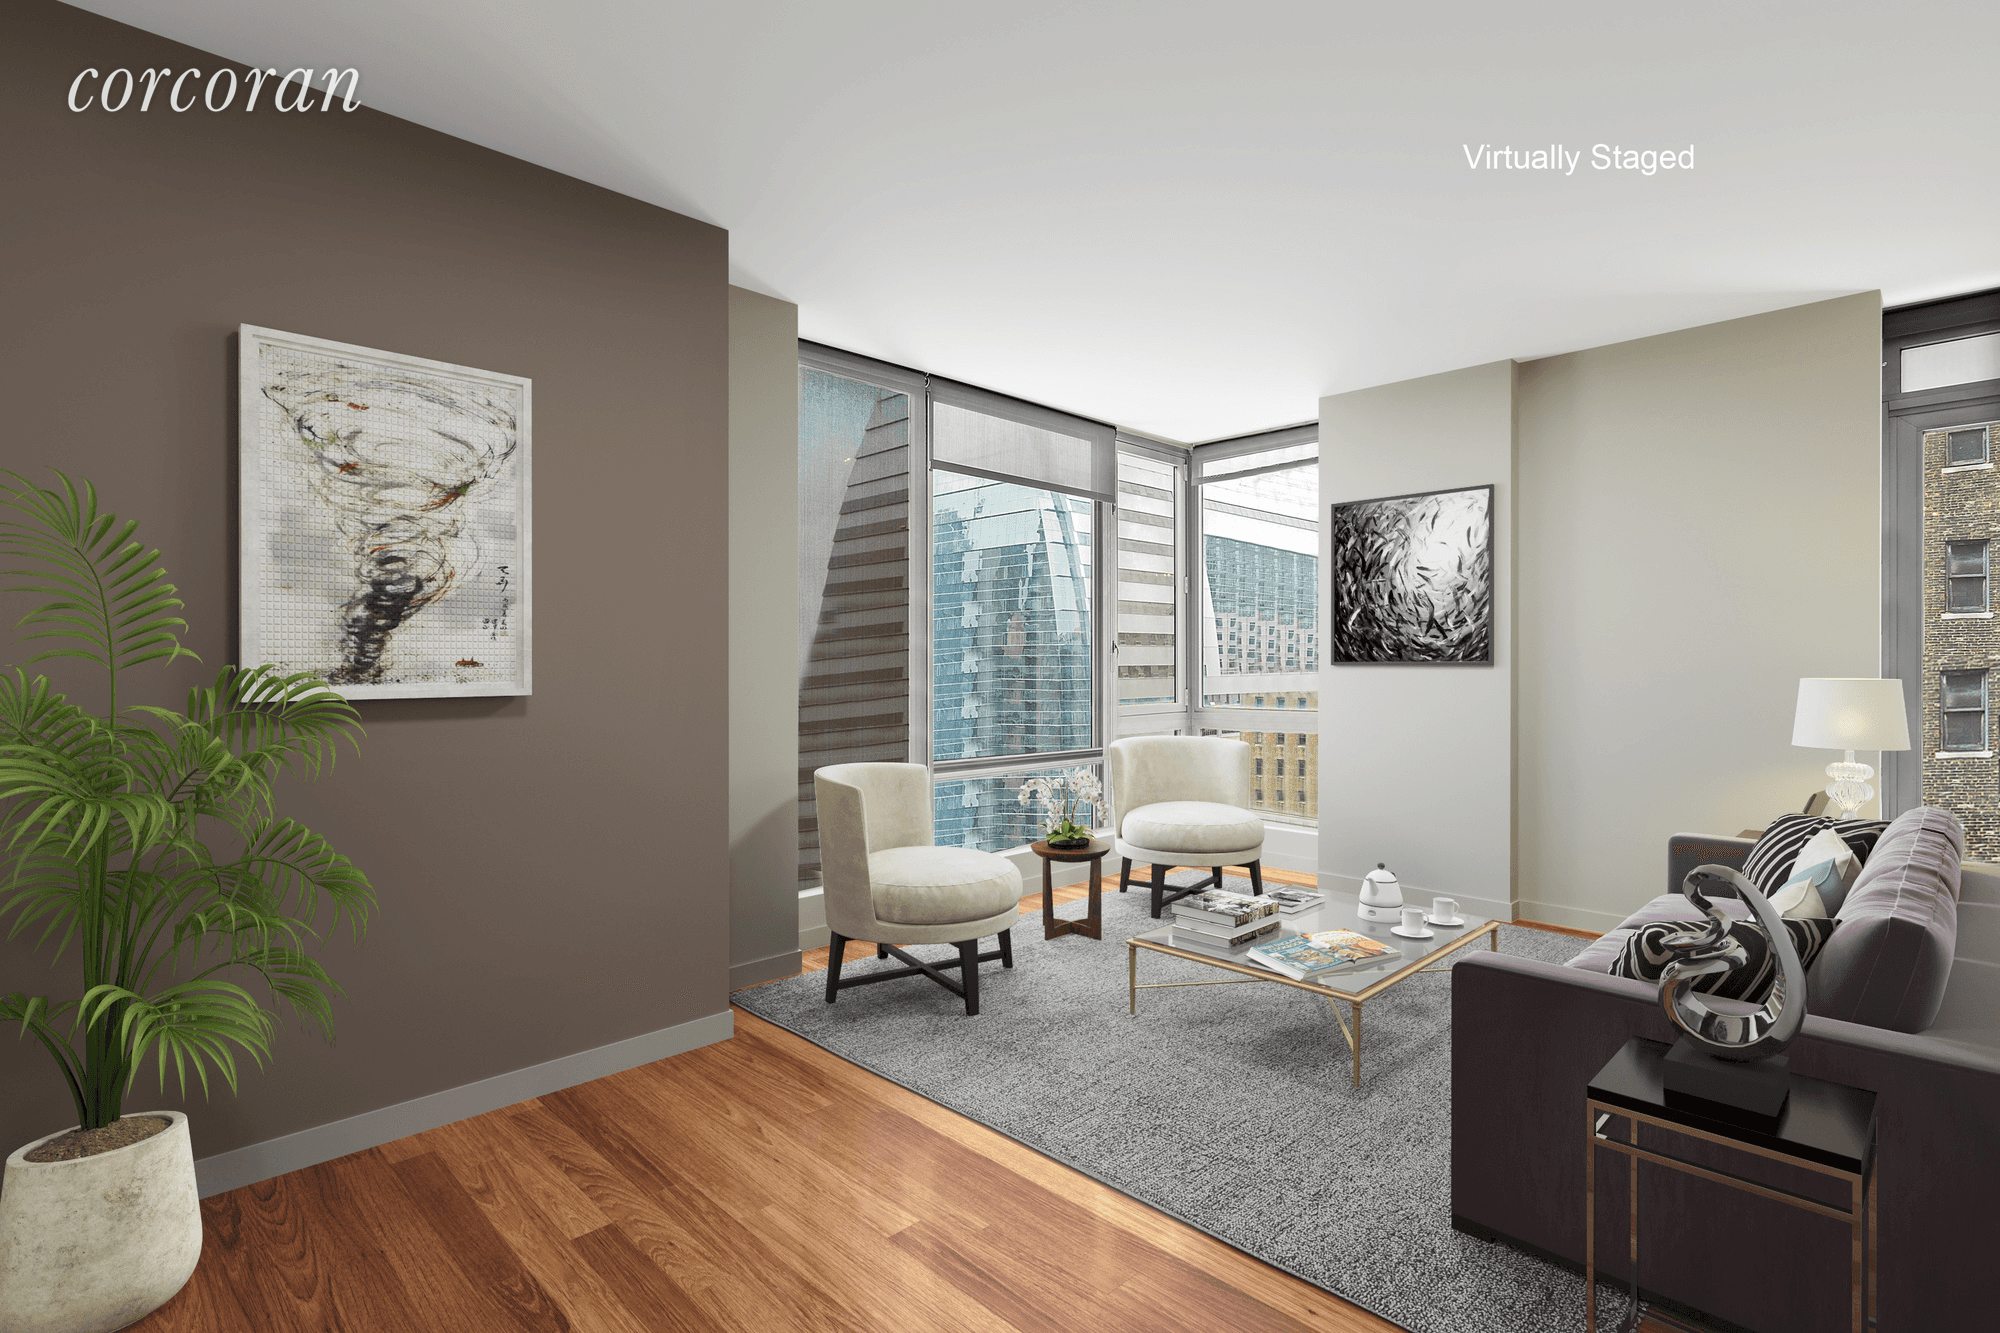 Enjoy bright, spacious, modern living in this beautiful 2 Bedroom 2 Bathroom corner apartment located in the heart of Gramercy with North and Eastern exposures.